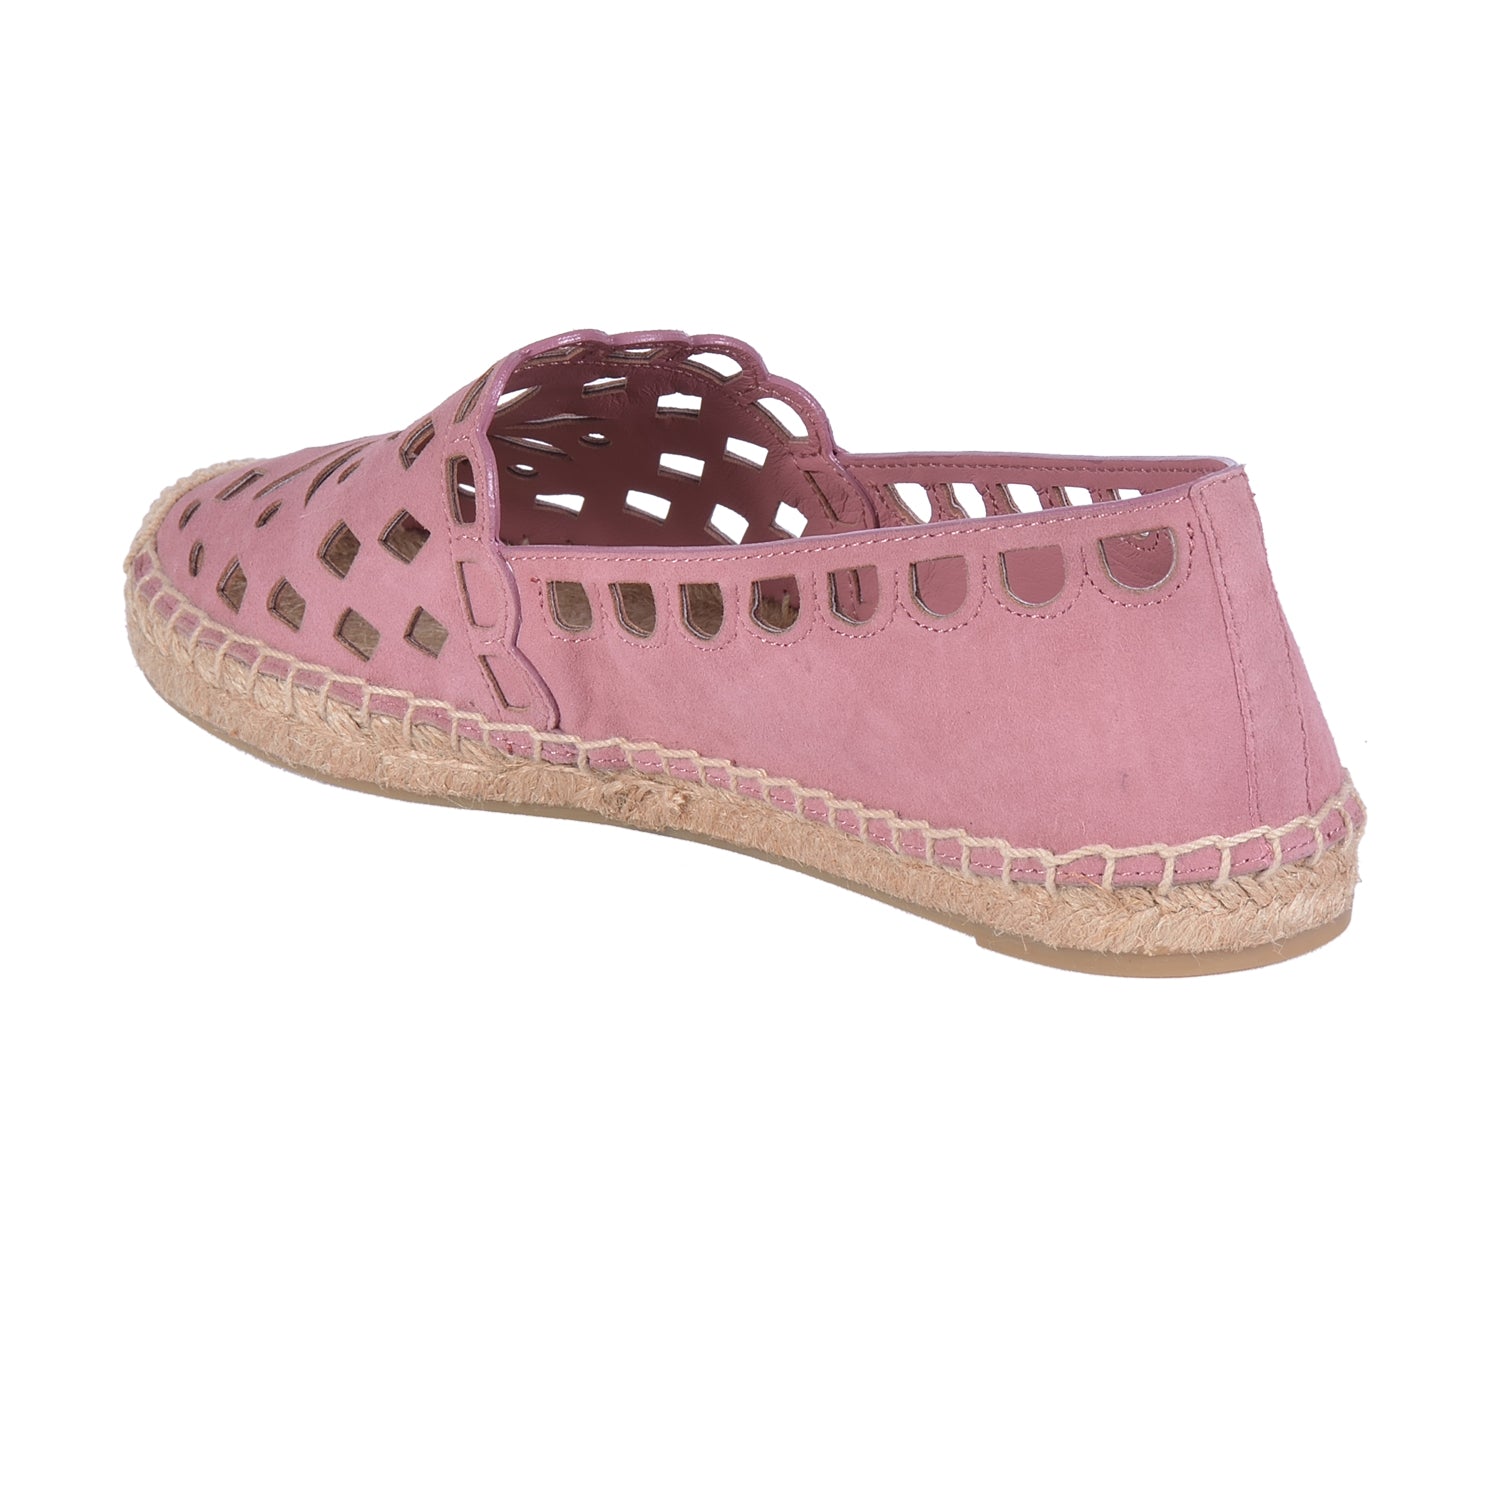 TORY BURCH MAY PERFORATED ESPADRILLE FLAT